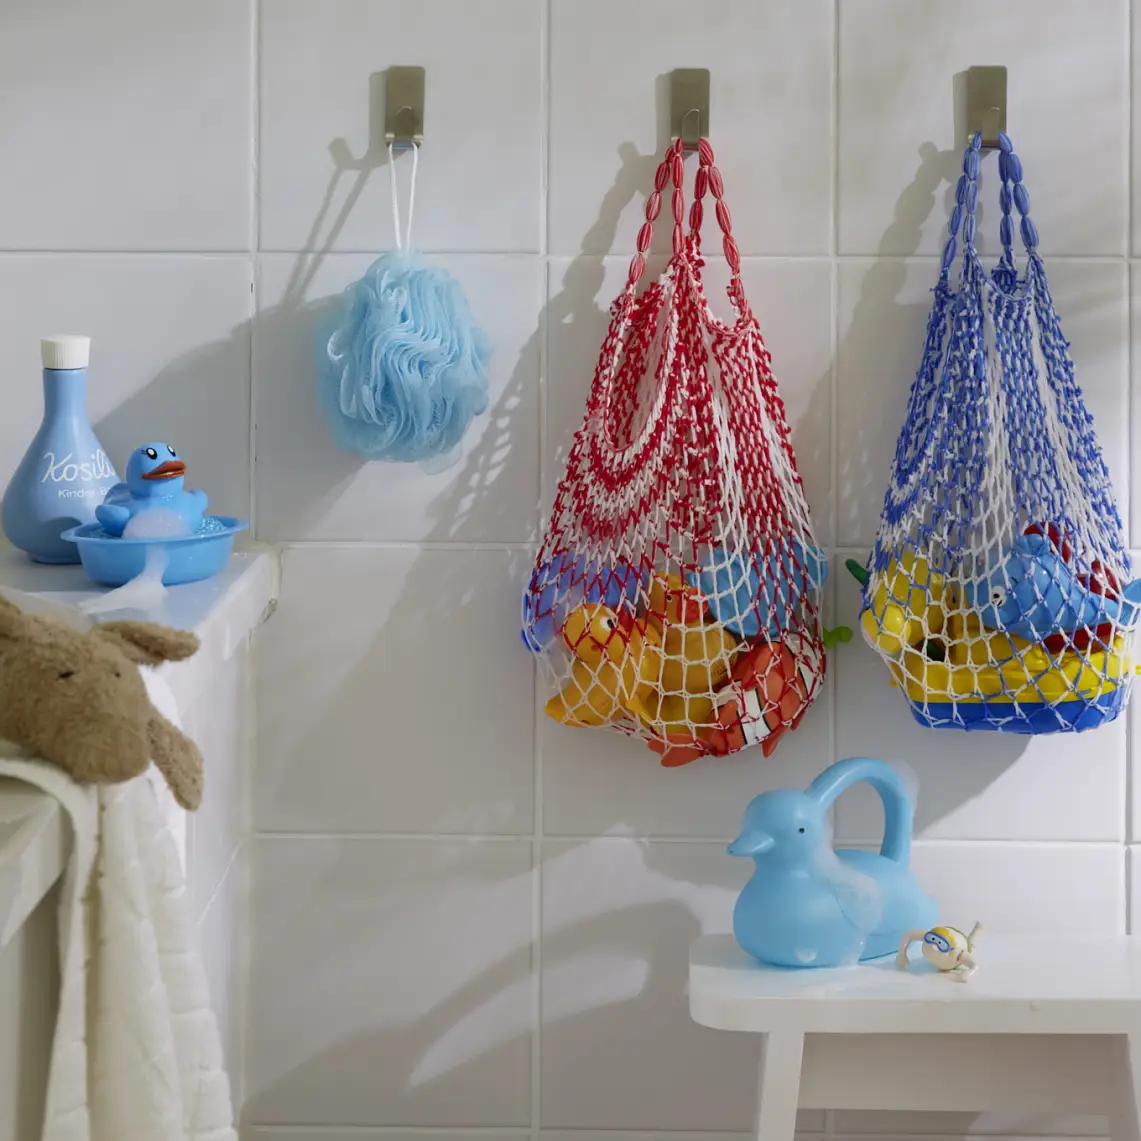 Everything that children need for a happy splash in the tub is safely stored in the shopping nets – and they dry in no time.